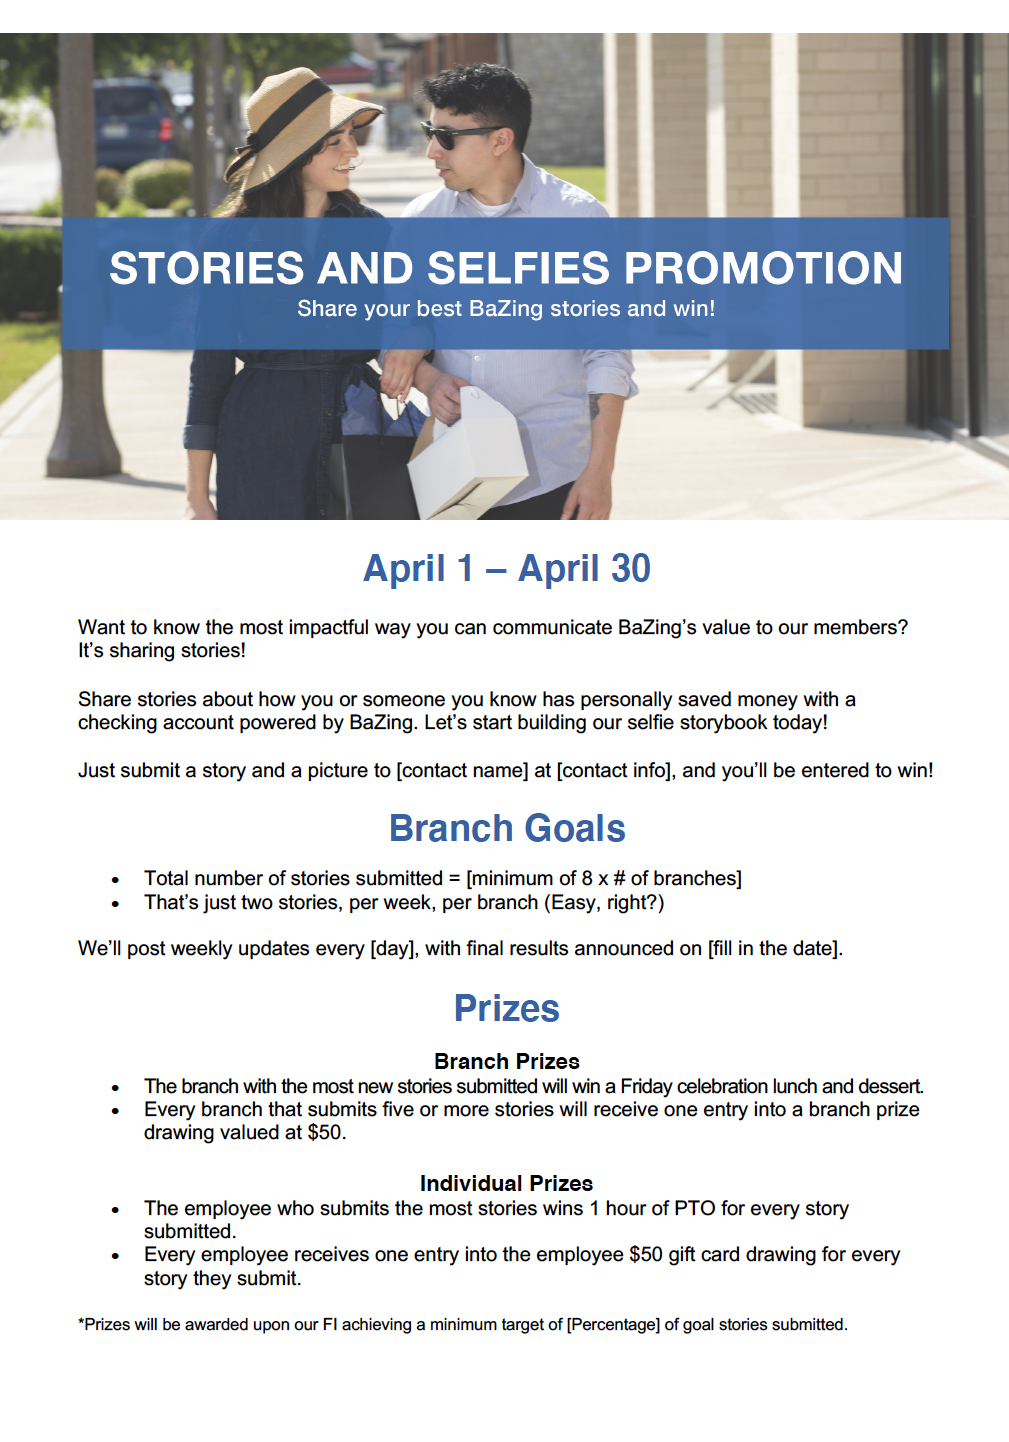 Stories and Selfies Promotion